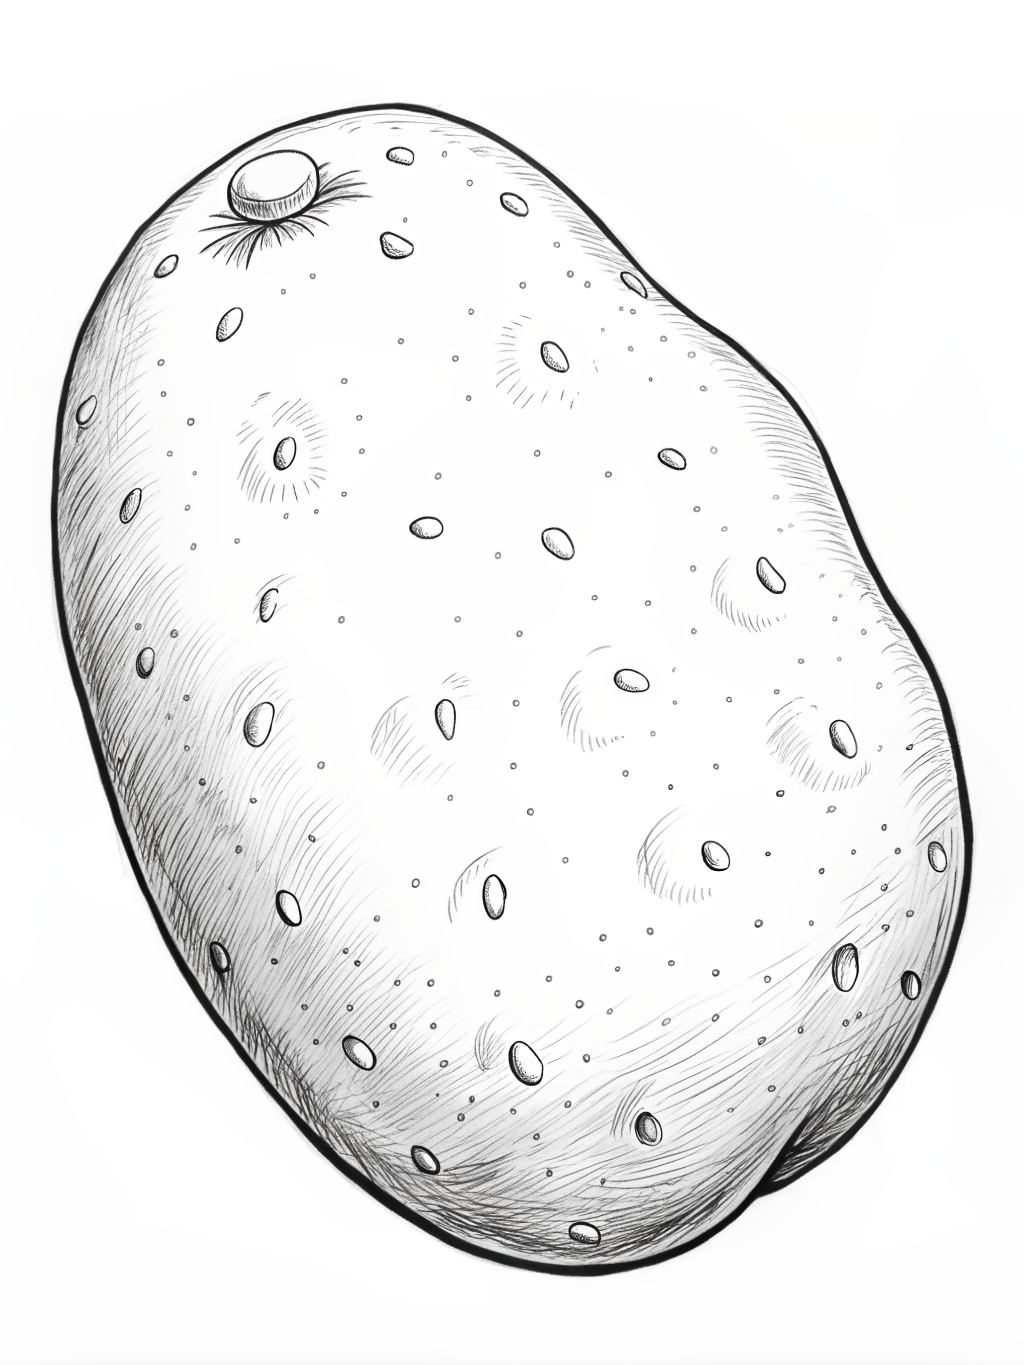 Children coloring book page, line art, black
and white, illustration of a potato